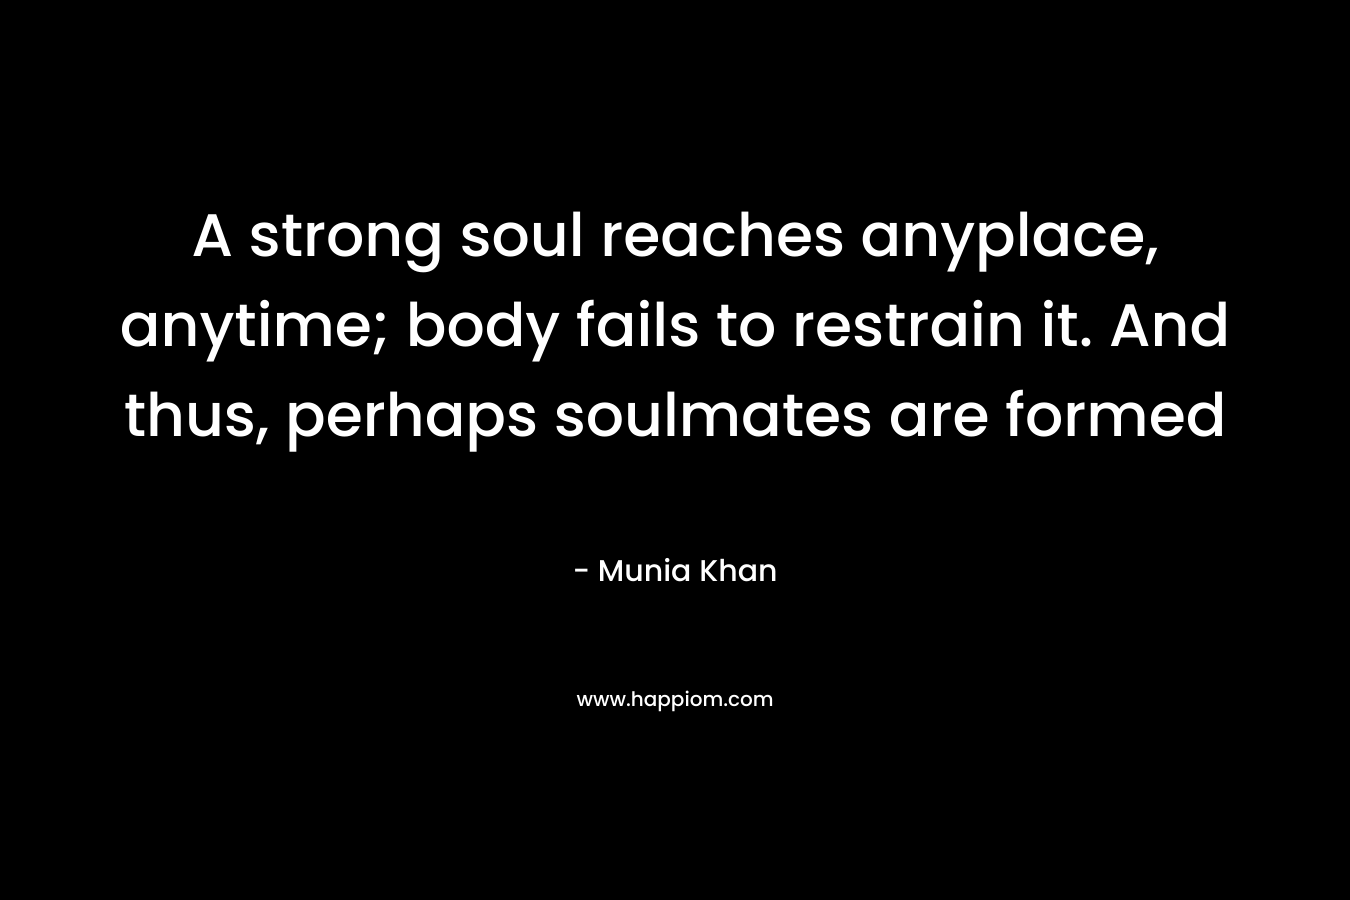 A strong soul reaches anyplace, anytime; body fails to restrain it. And thus, perhaps soulmates are formed